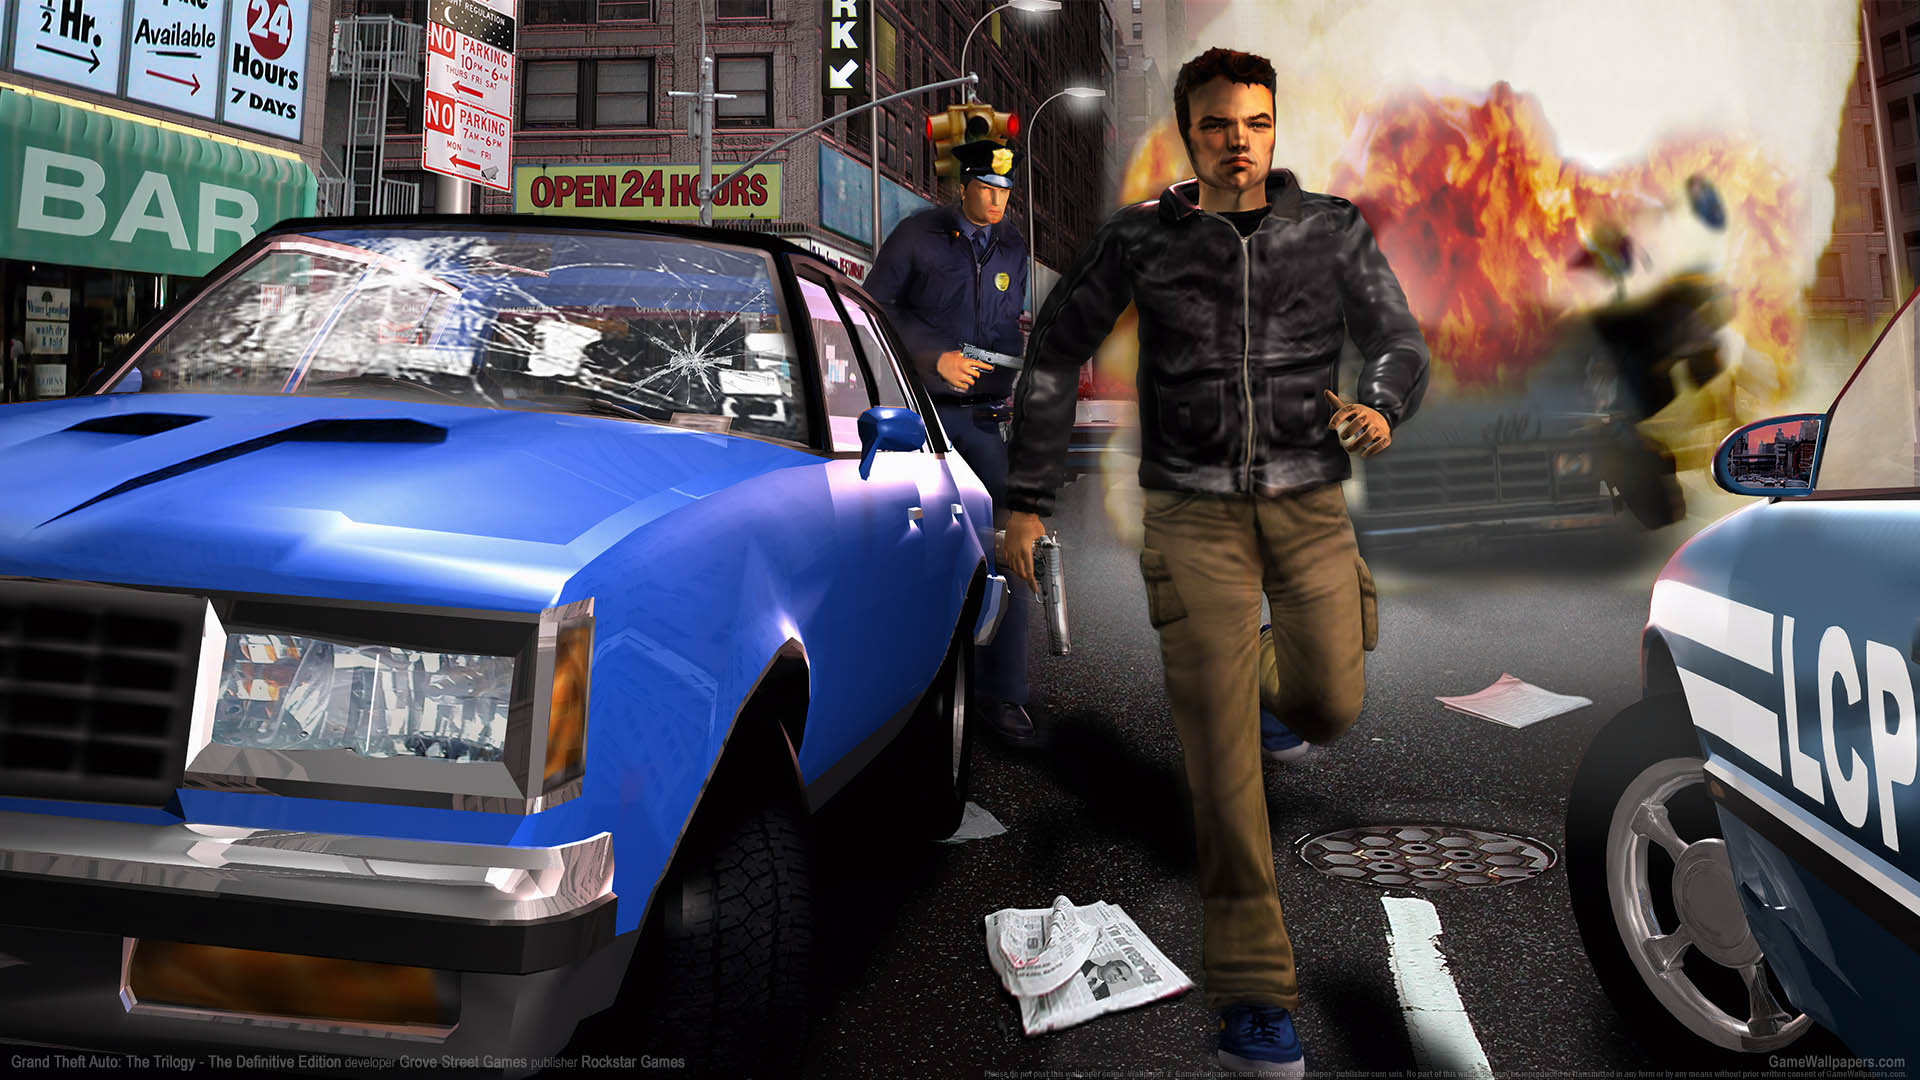 Grand Theft Auto: The Trilogy - The Definitive Edition wallpaper 01 1920x1080